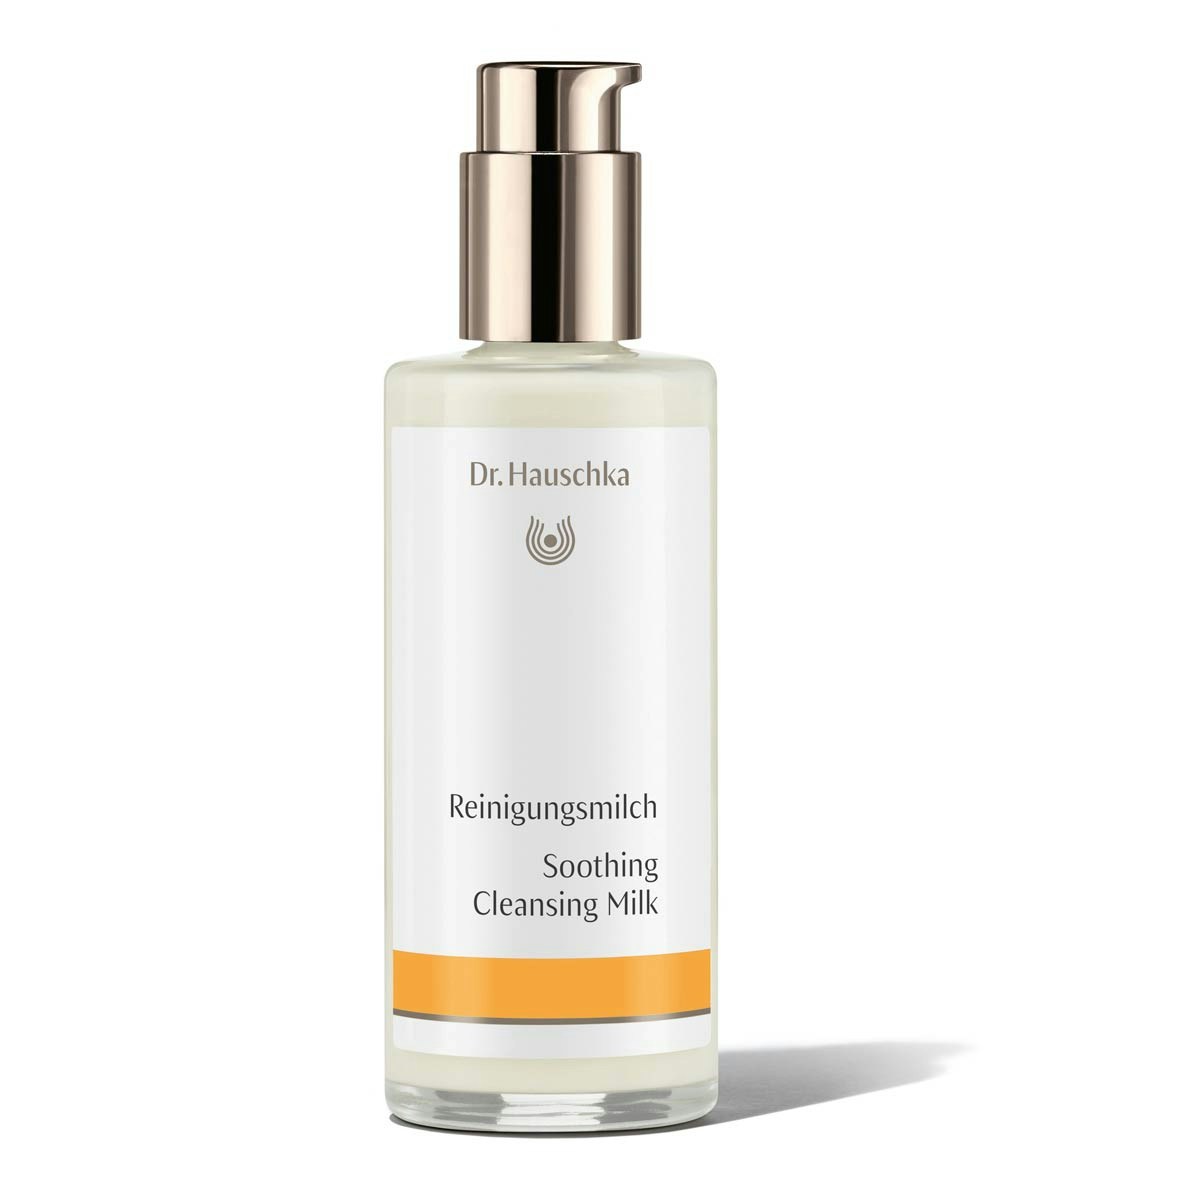 Photos - Facial / Body Cleansing Product Dr. Hauschka Dr Hauschka DR HAUSCHKA  Soothing Cleansing Milk 145ml 